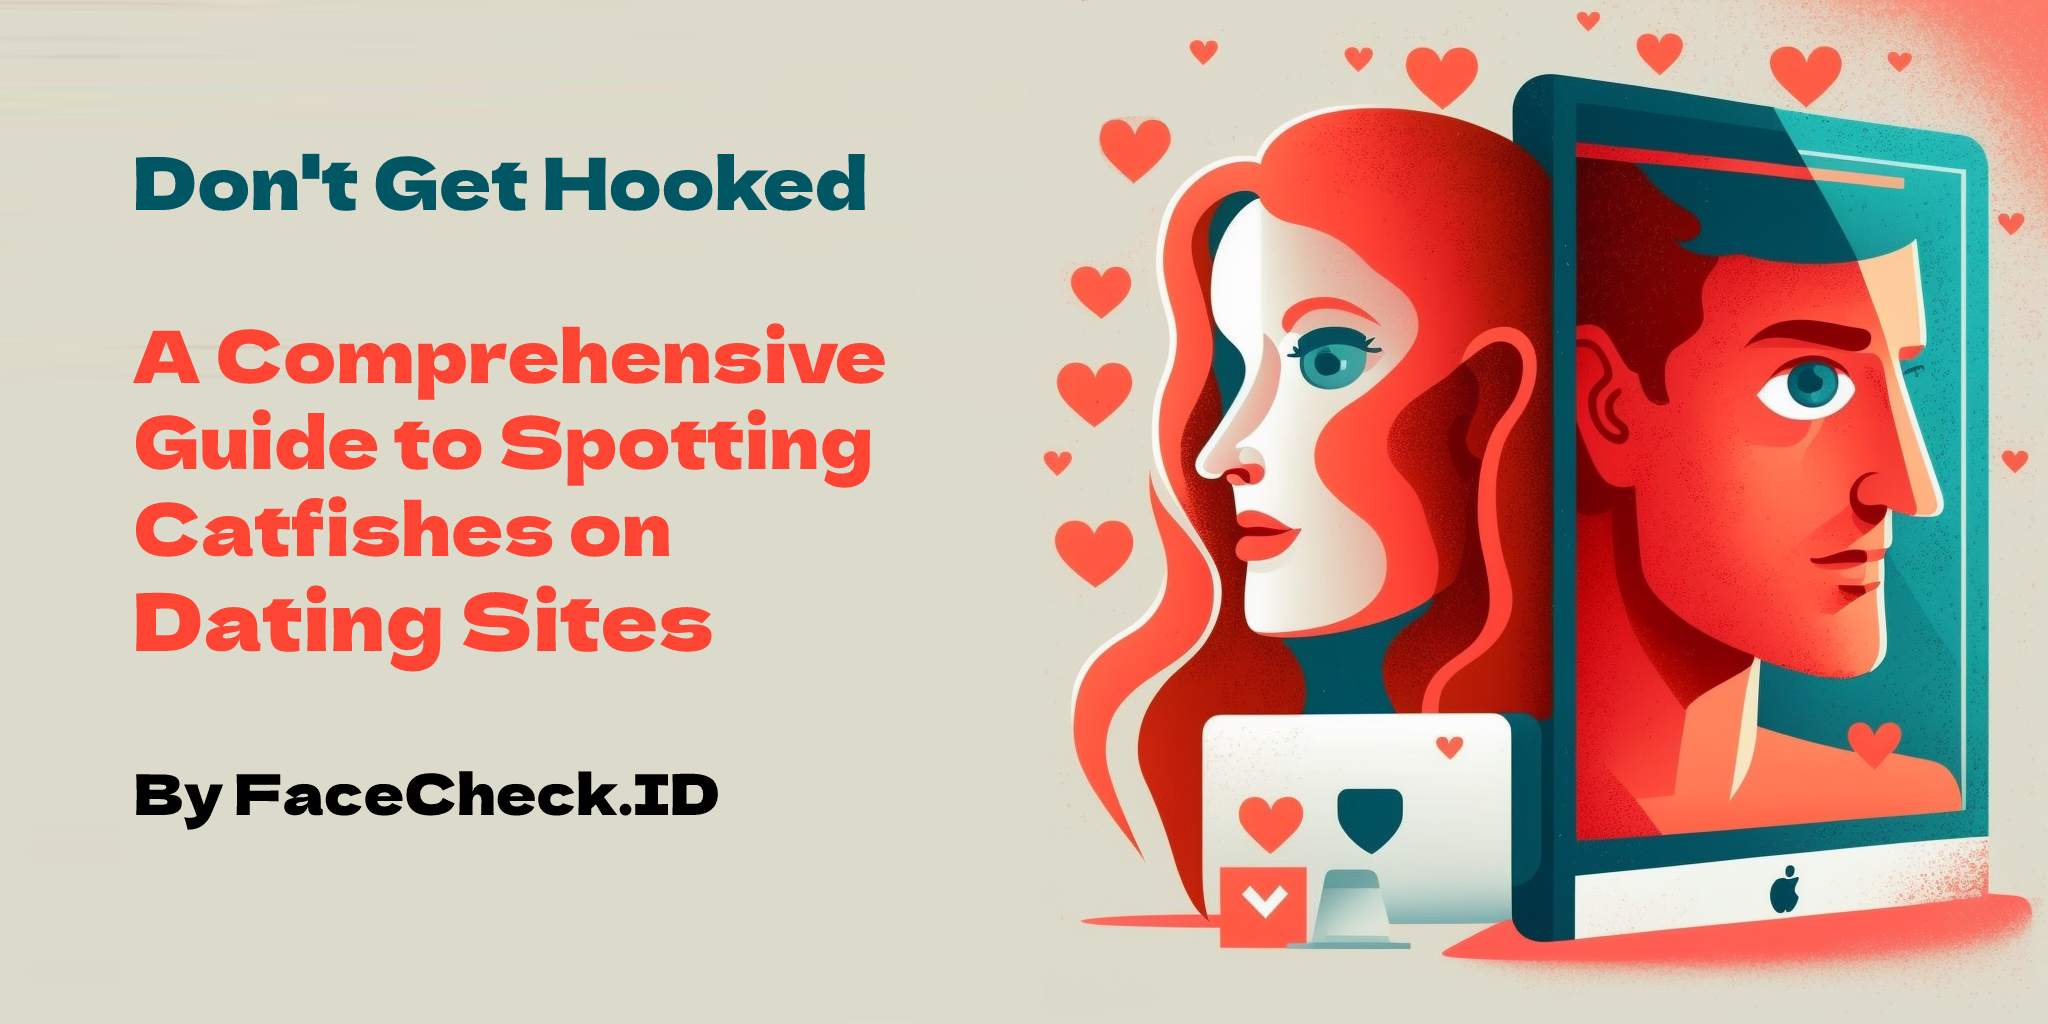 Don't Get Hooked: A Comprehensive Guide to Spotting Catfishes on Dating Sites